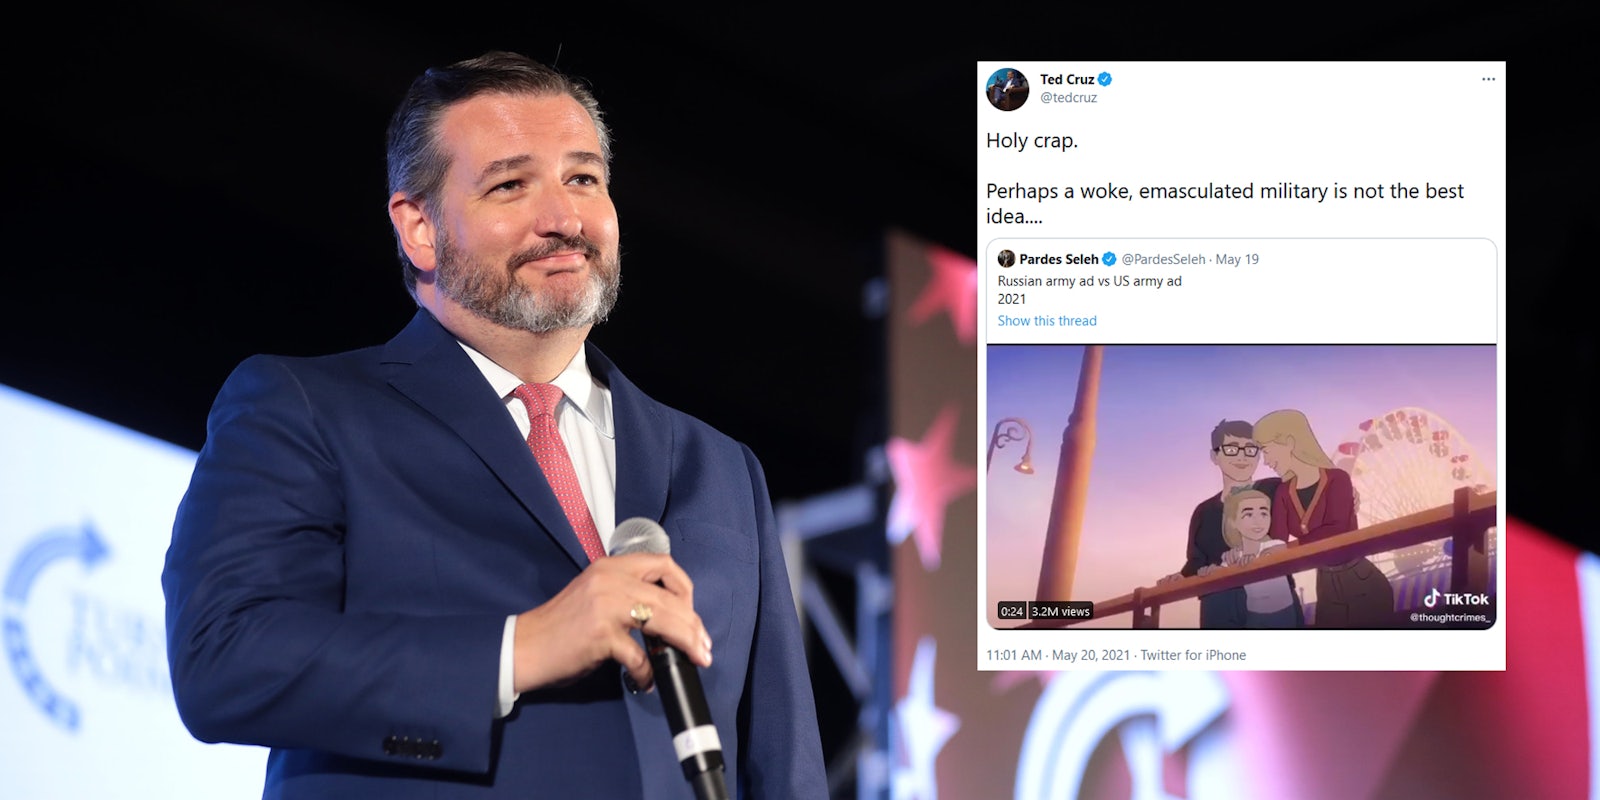 Sen. Ted Cruz next to a tweet he sent where he called the U.S. military 'emasculated' and linked to a video of a Russian ad for its military.